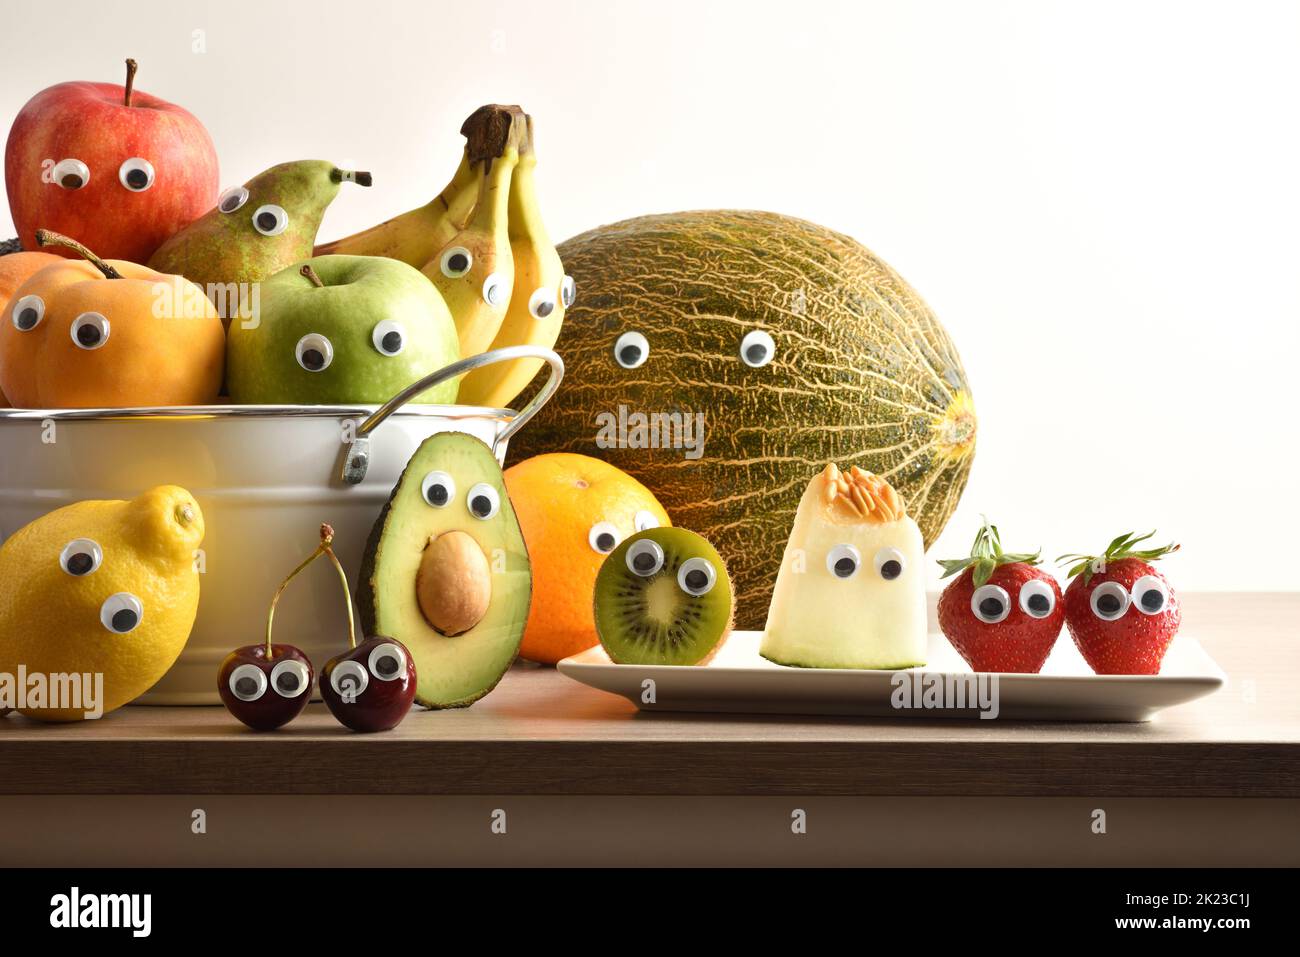 Group of fruits with eyes in containers on wooden bench and white isolated background. Fruits and vegetables child healthy eating concept. Stock Photo